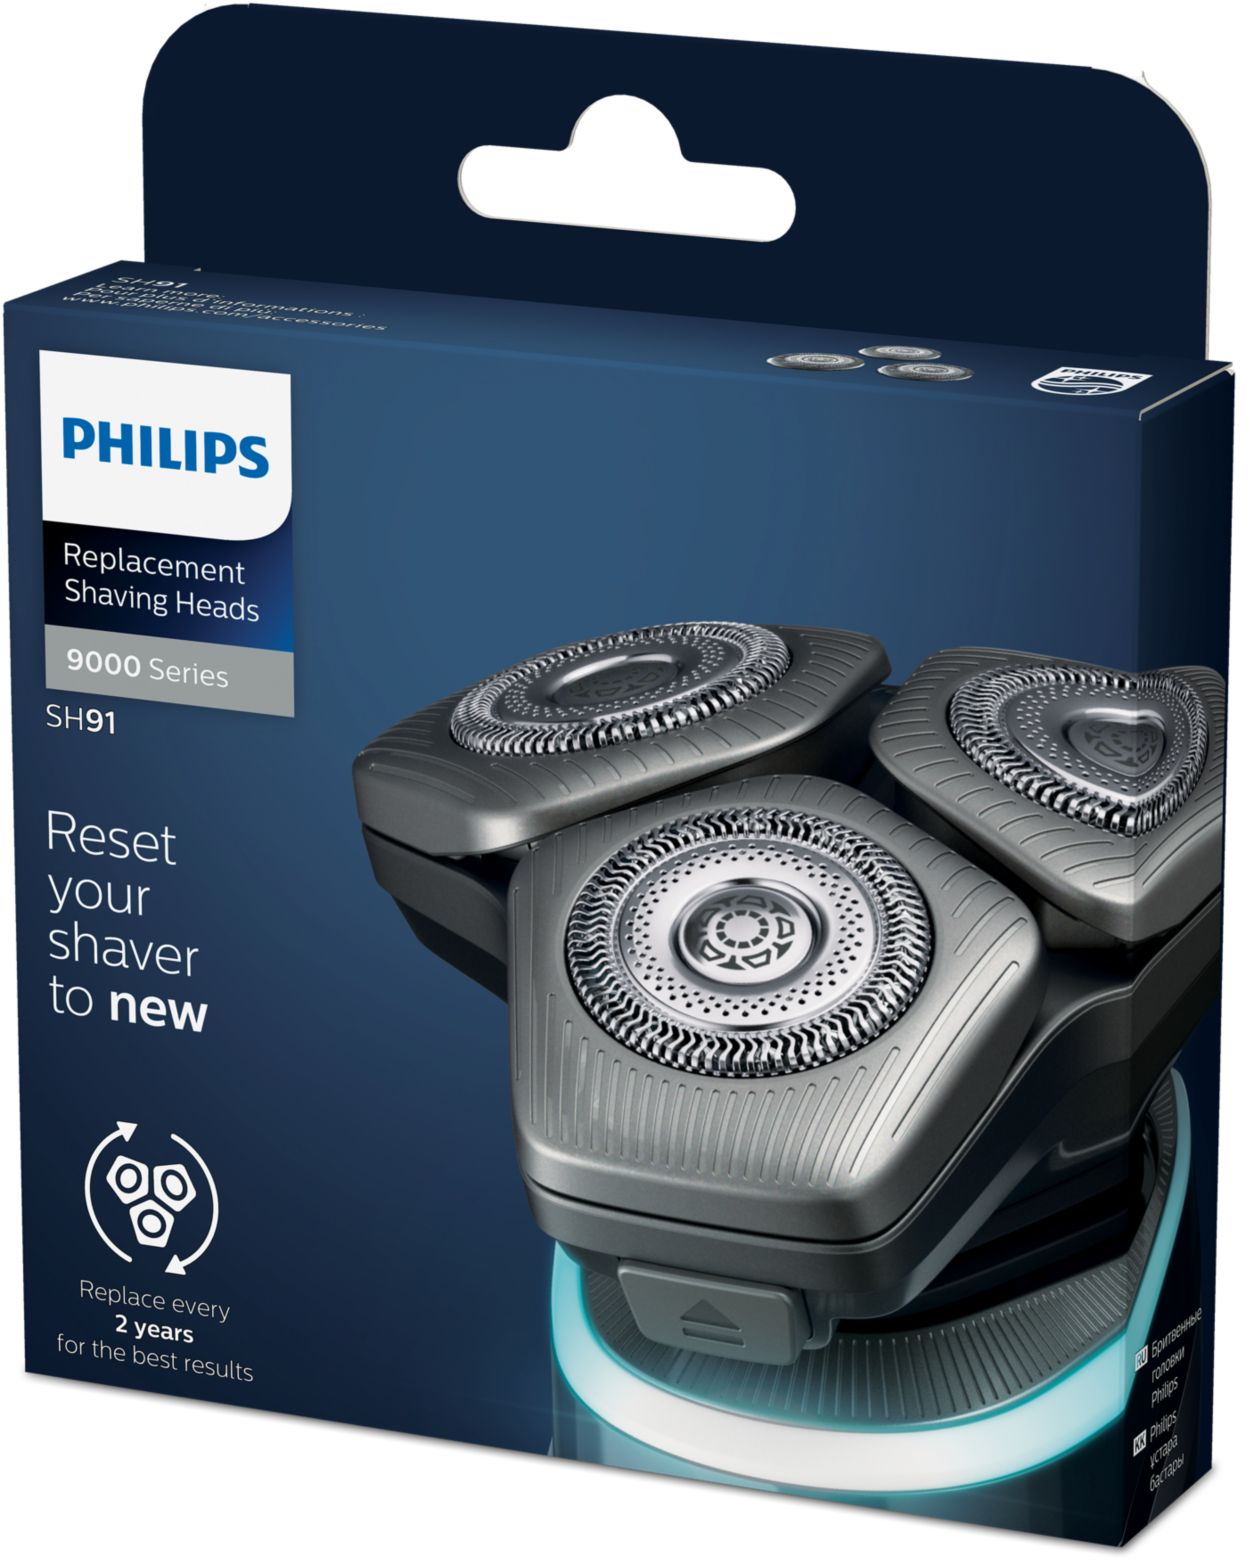 Shaver series 9000 SP9000 heads | Philips SH91/50 and Replacement shaving